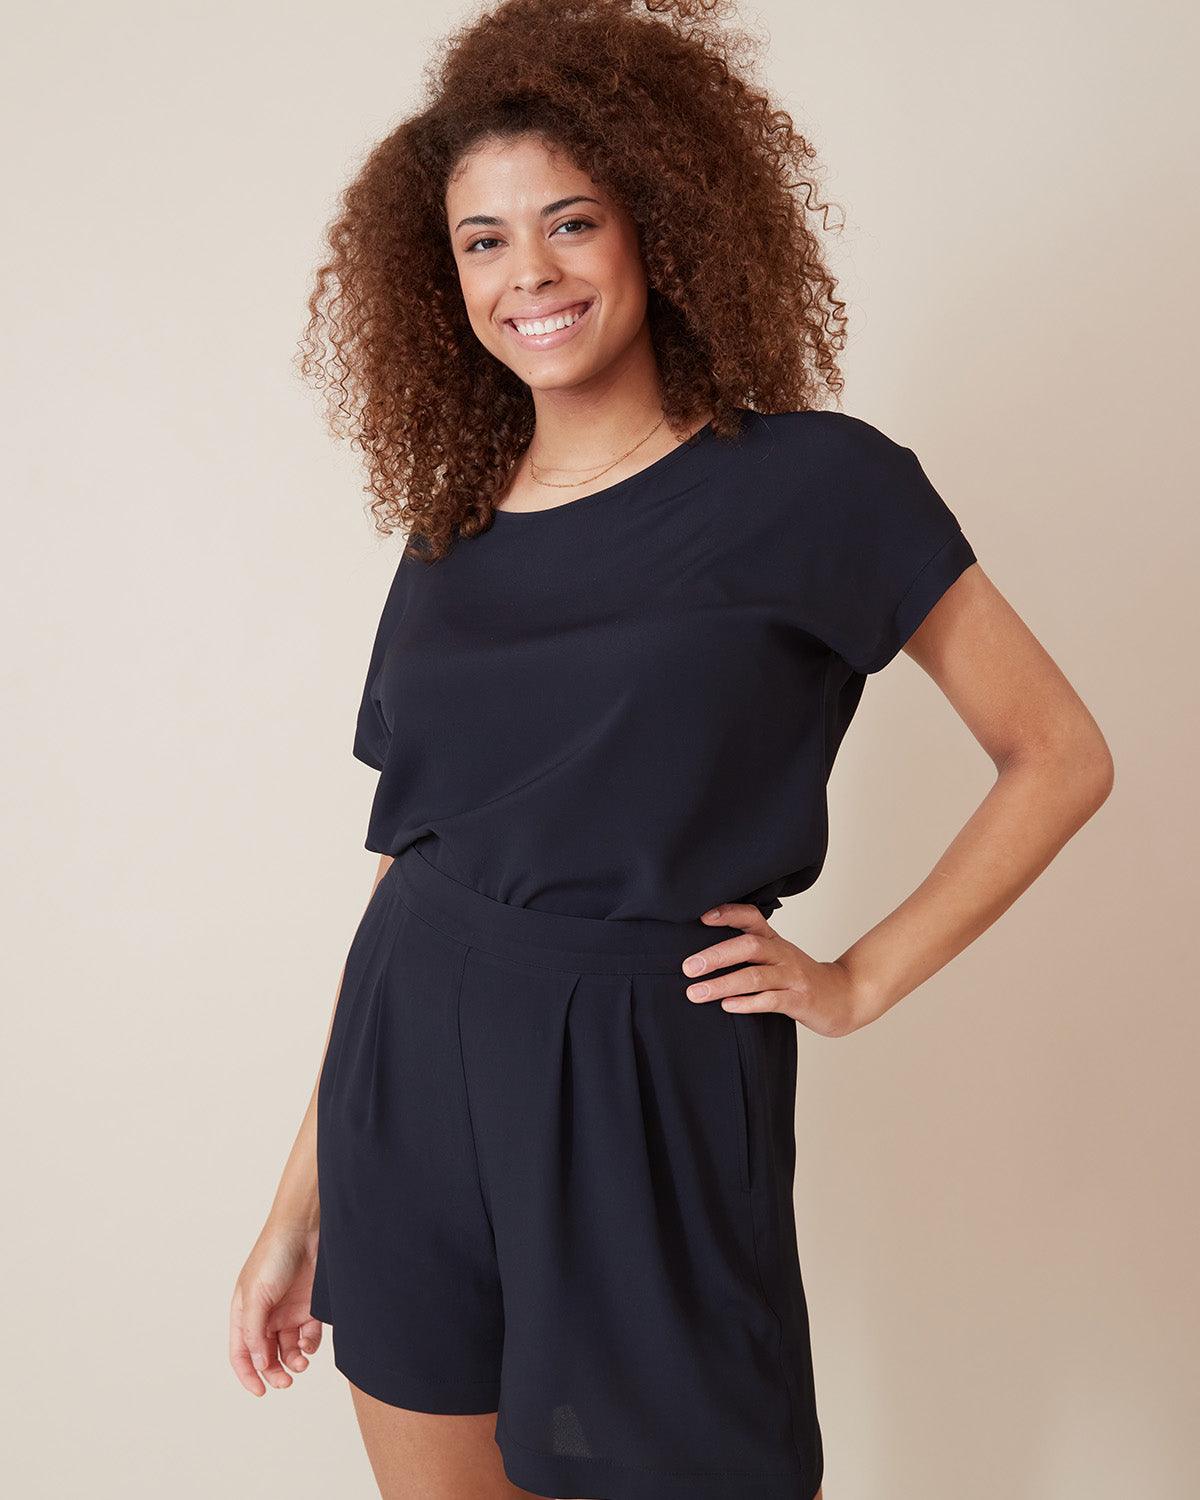 "#color_NAVY|Cassandra is 5'11", wearing a size L